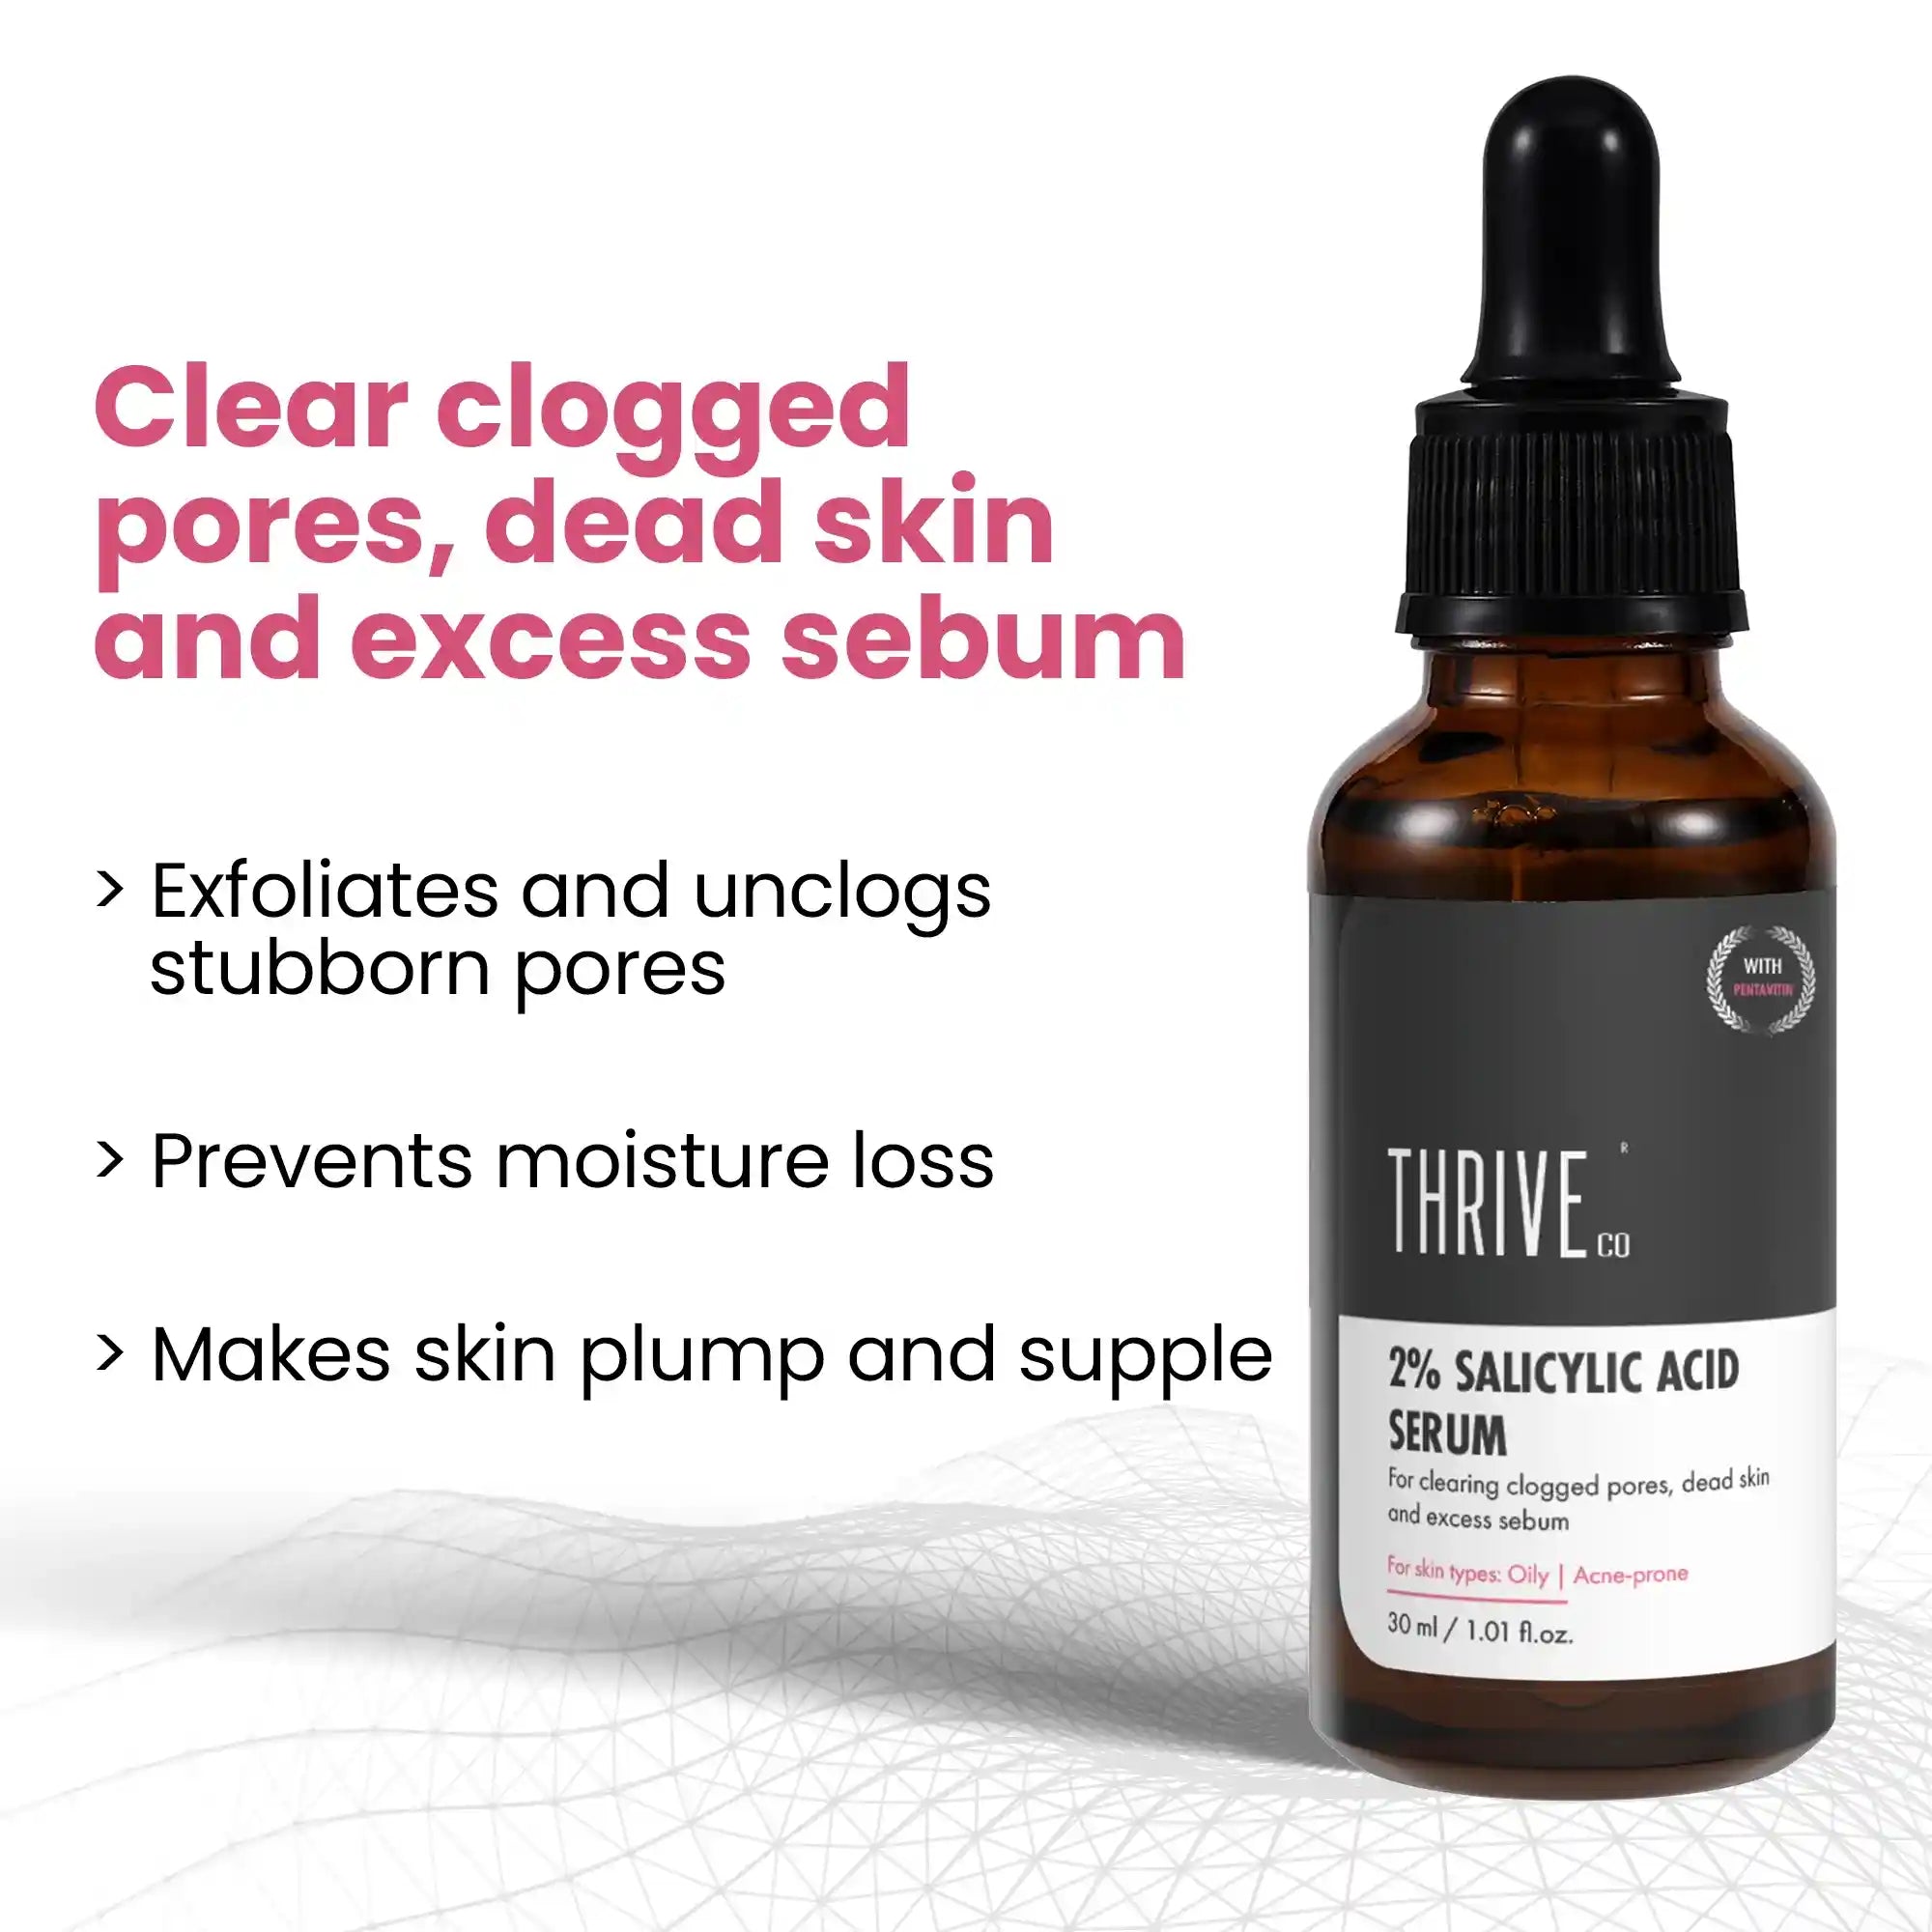 thriveco salicylic acid serum for acne free and clear skin